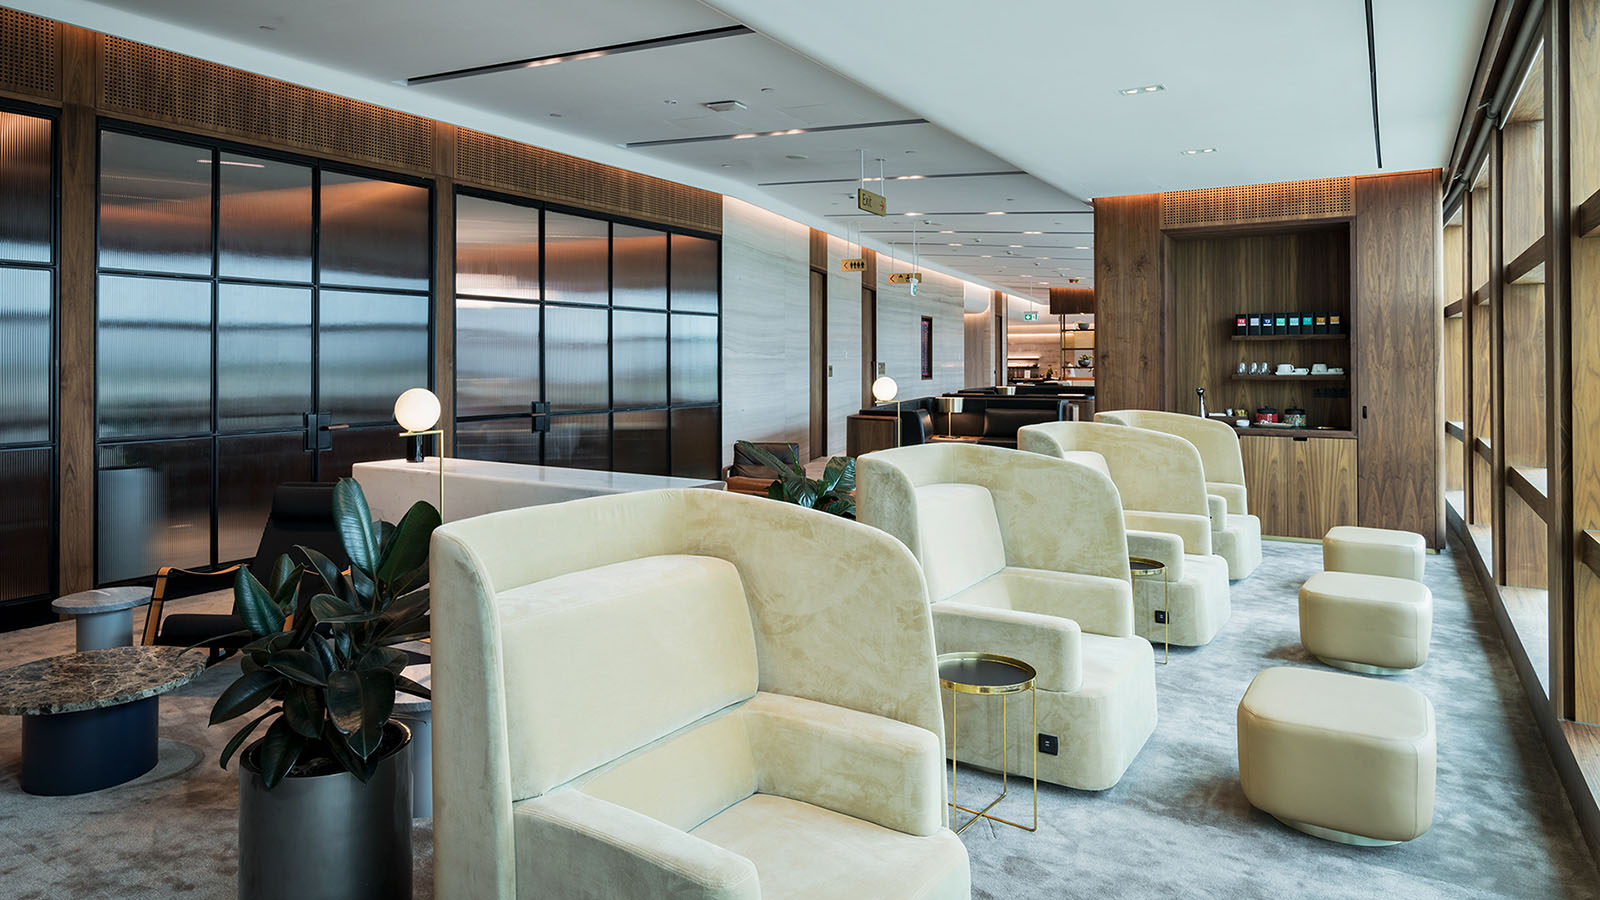 Seating at the Qantas Chairman's Lounge in Brisbane